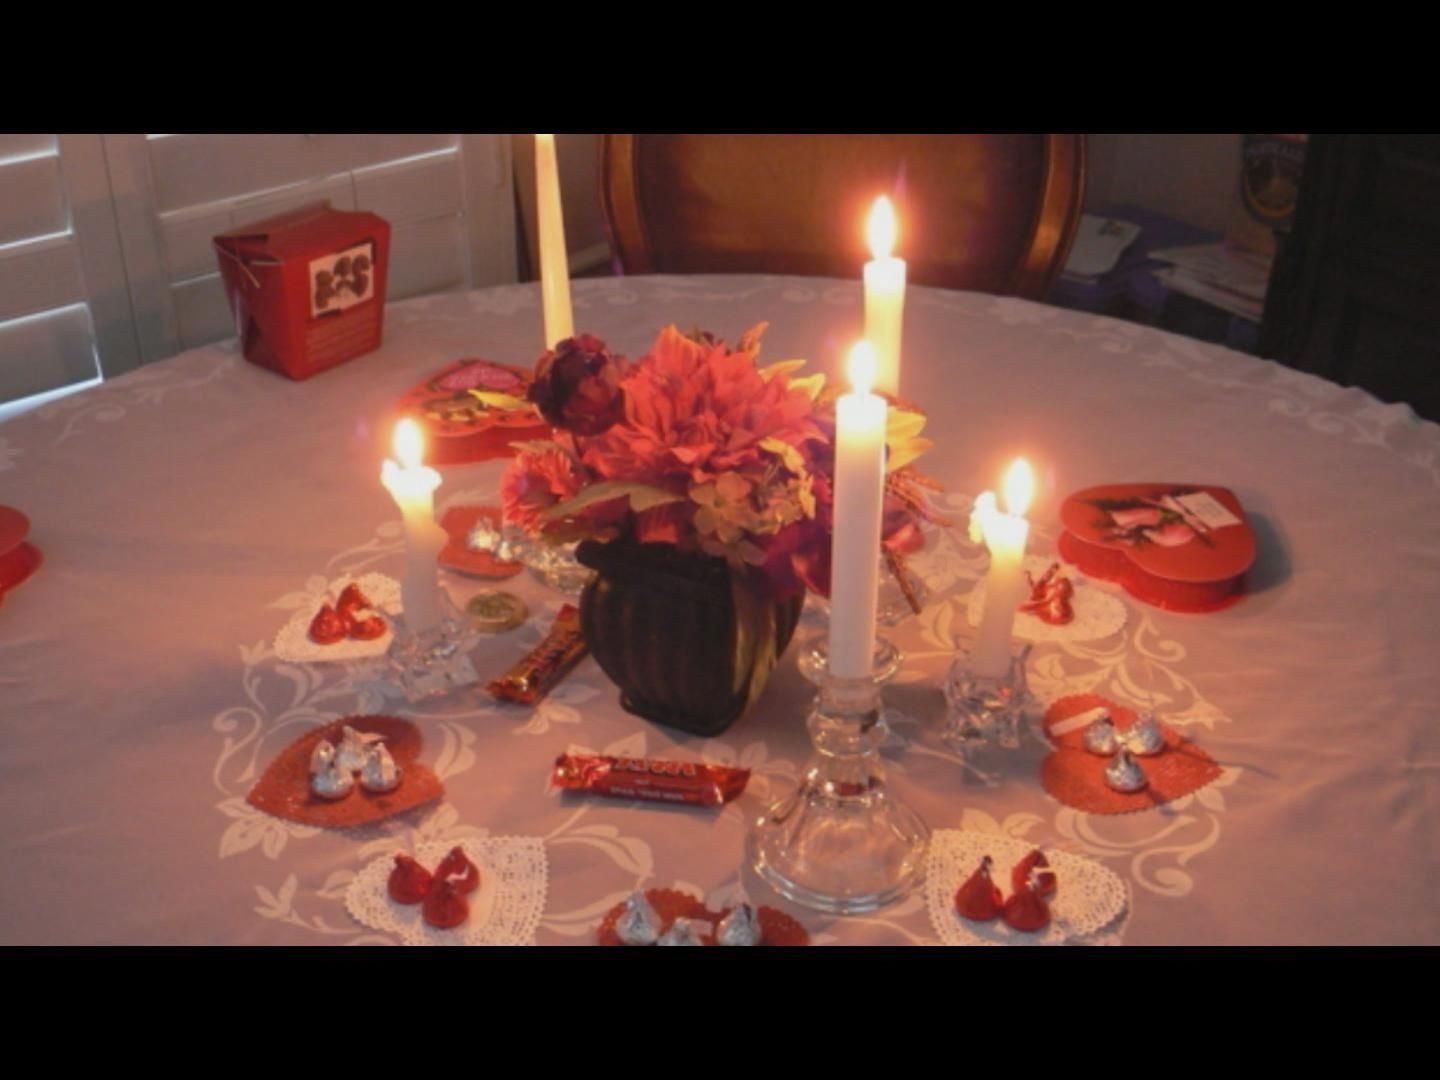 10 Gorgeous Romantic Dinner At Home Ideas romantic valentine dinner ideas at home learn to have more great 1 2023